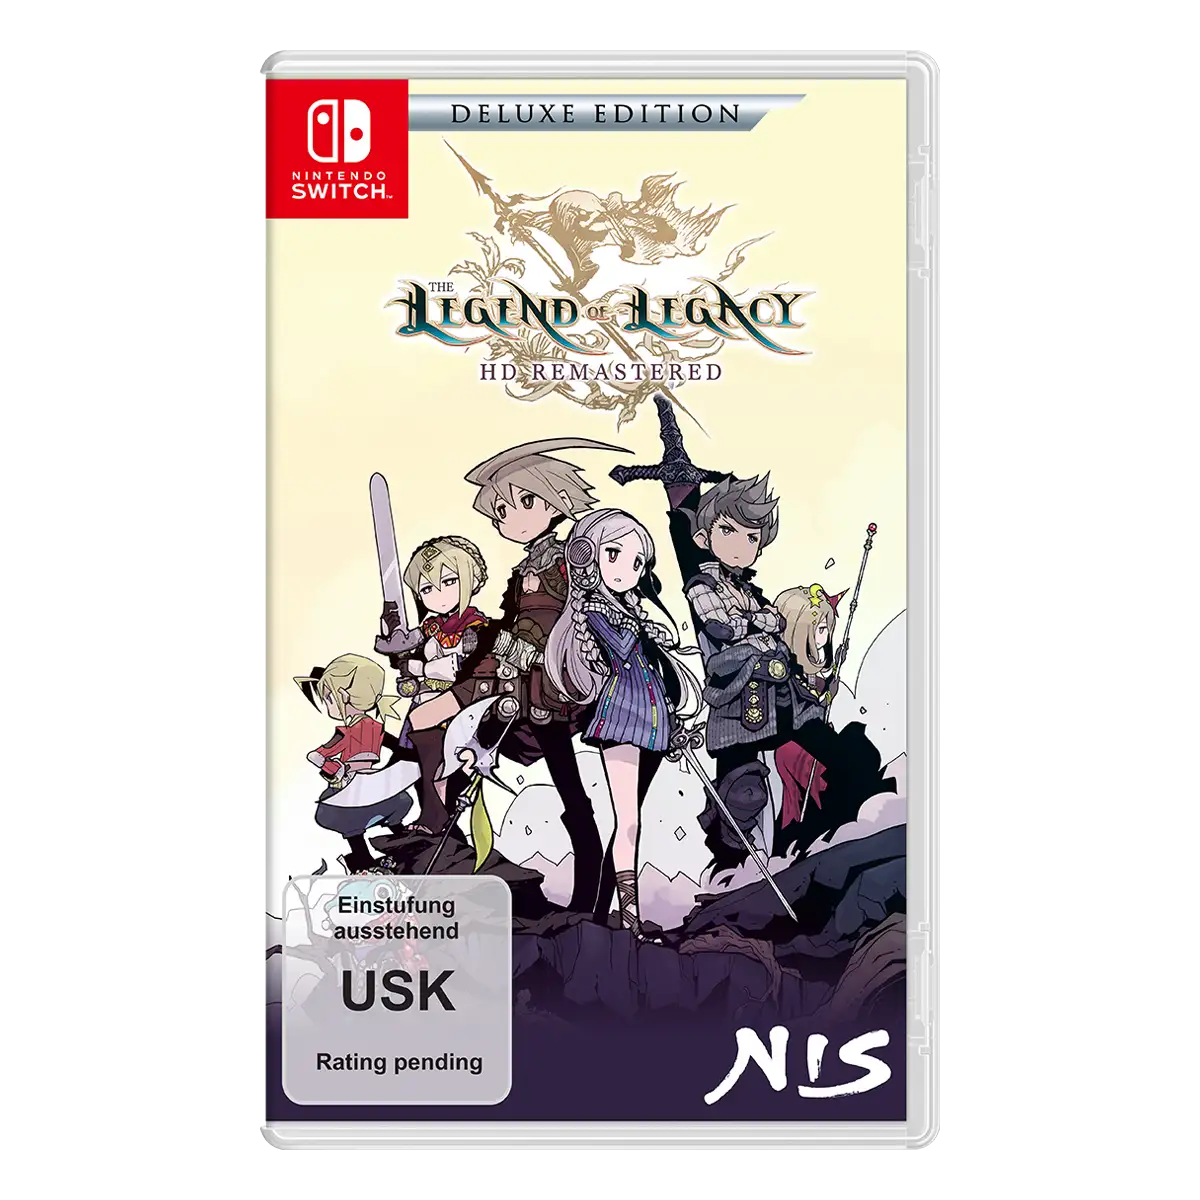 The Legend of Legacy HD Remastered - Deluxe Edition (Switch)